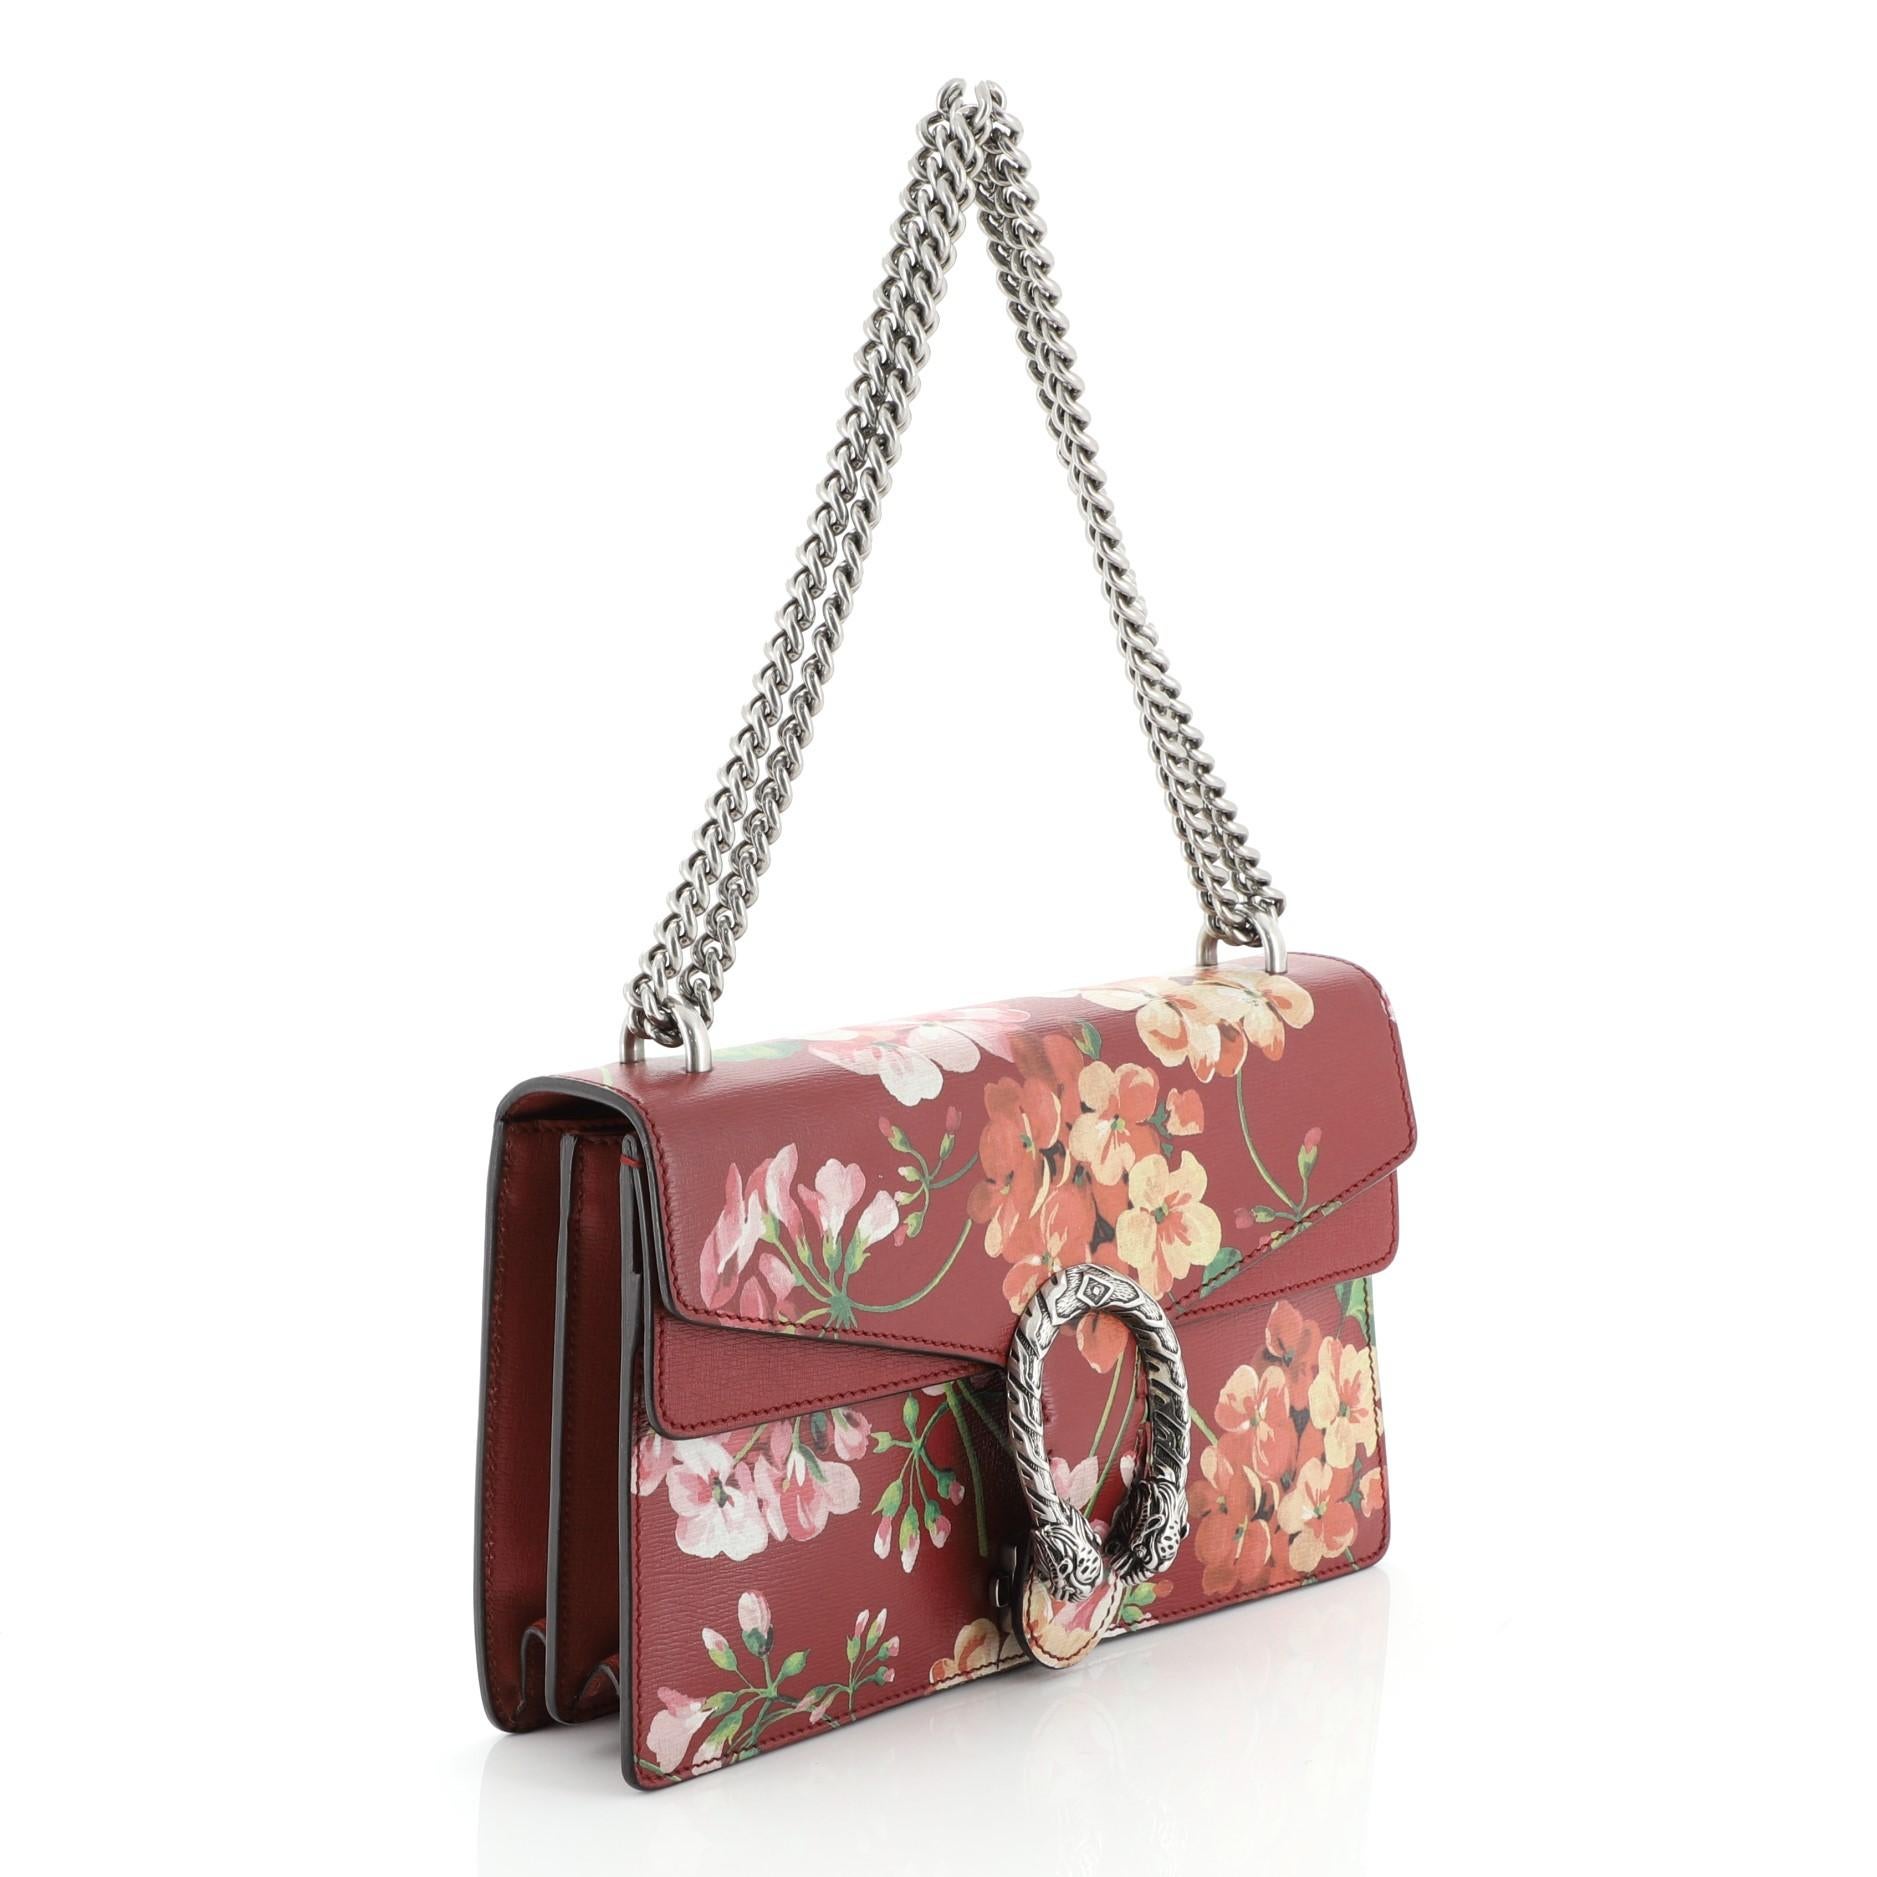 This Gucci Dionysus Bag Blooms Print Leather Small, crafted from red leather with blooms print, features sliding chain strap, tiger head spur detail on flap, and aged silver-tone hardware. Its pin closure with side release opens to a neutral fabric